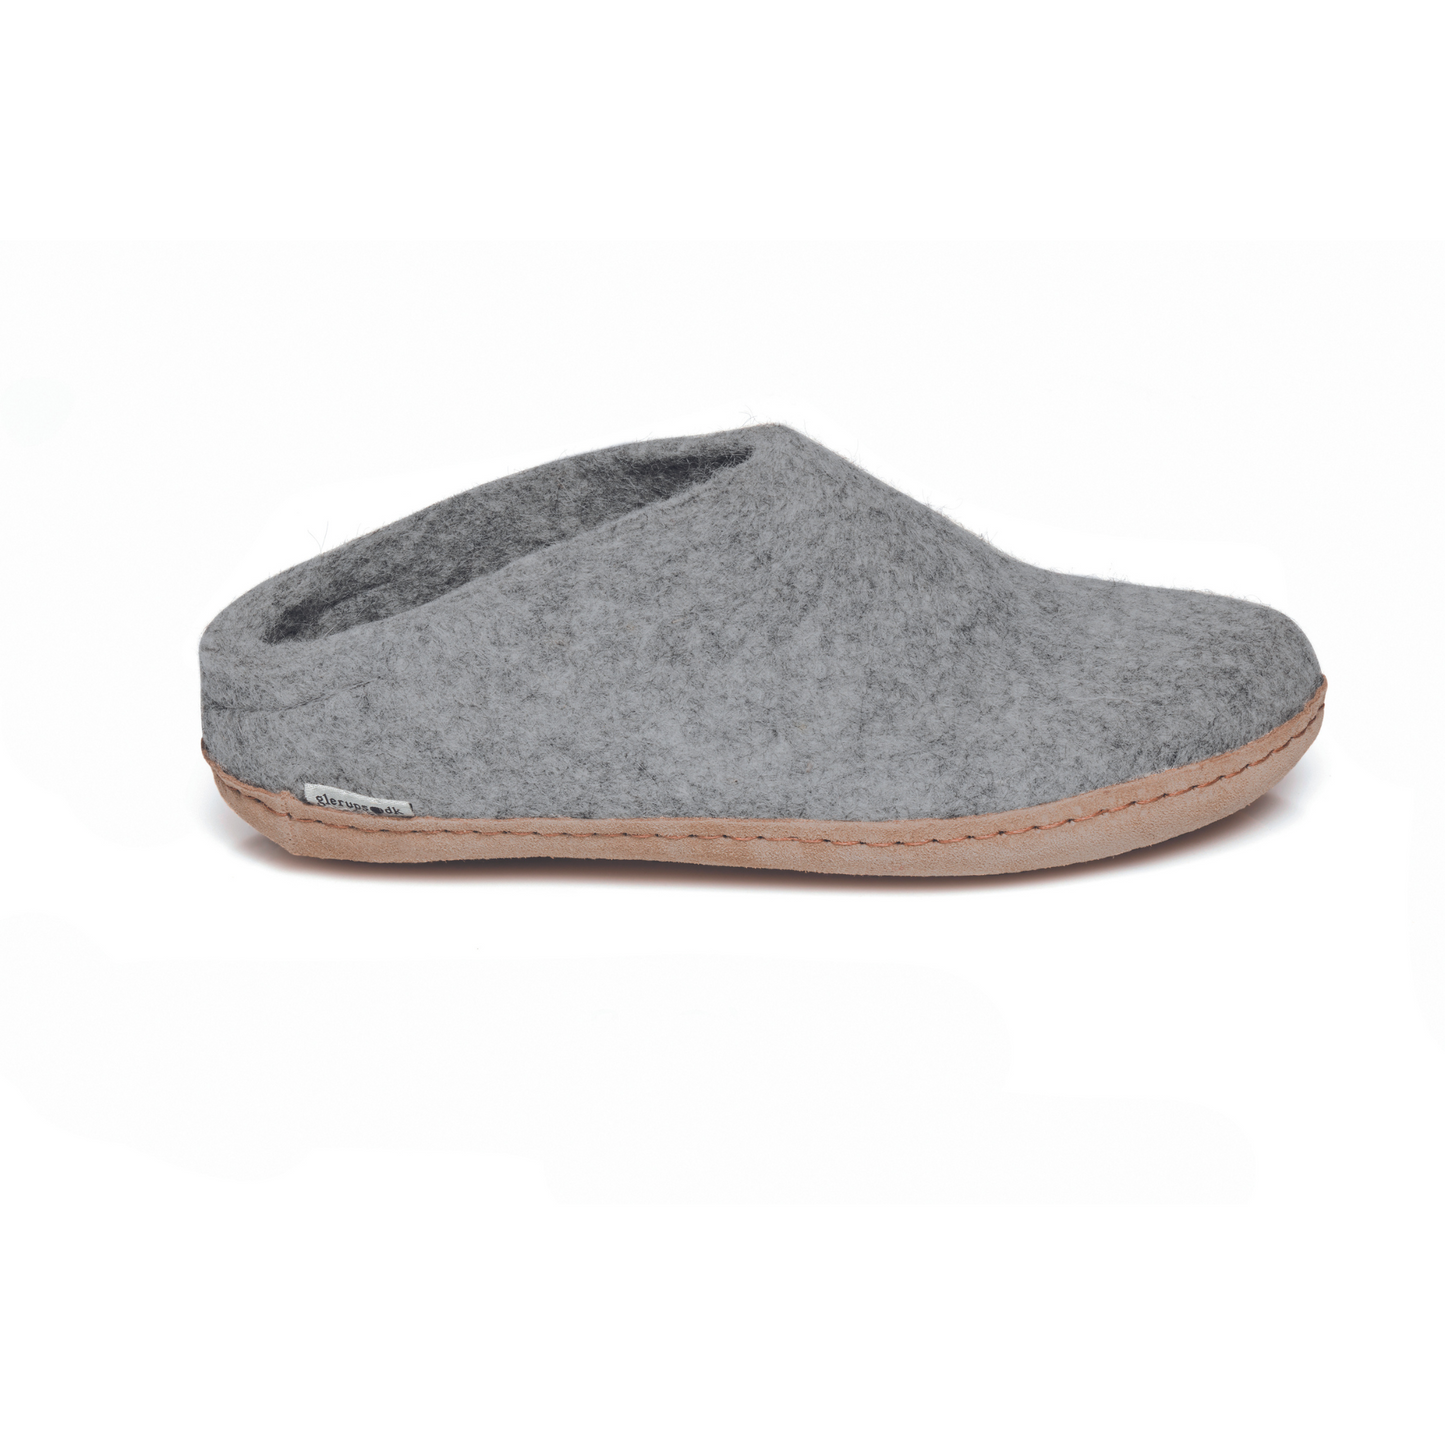 A light grey slipper is pictured in profile, showing the low back of the heel. The bottom lined in tan leather has a small tag with the brand name attached in the seam where the leather meets the felted wool.